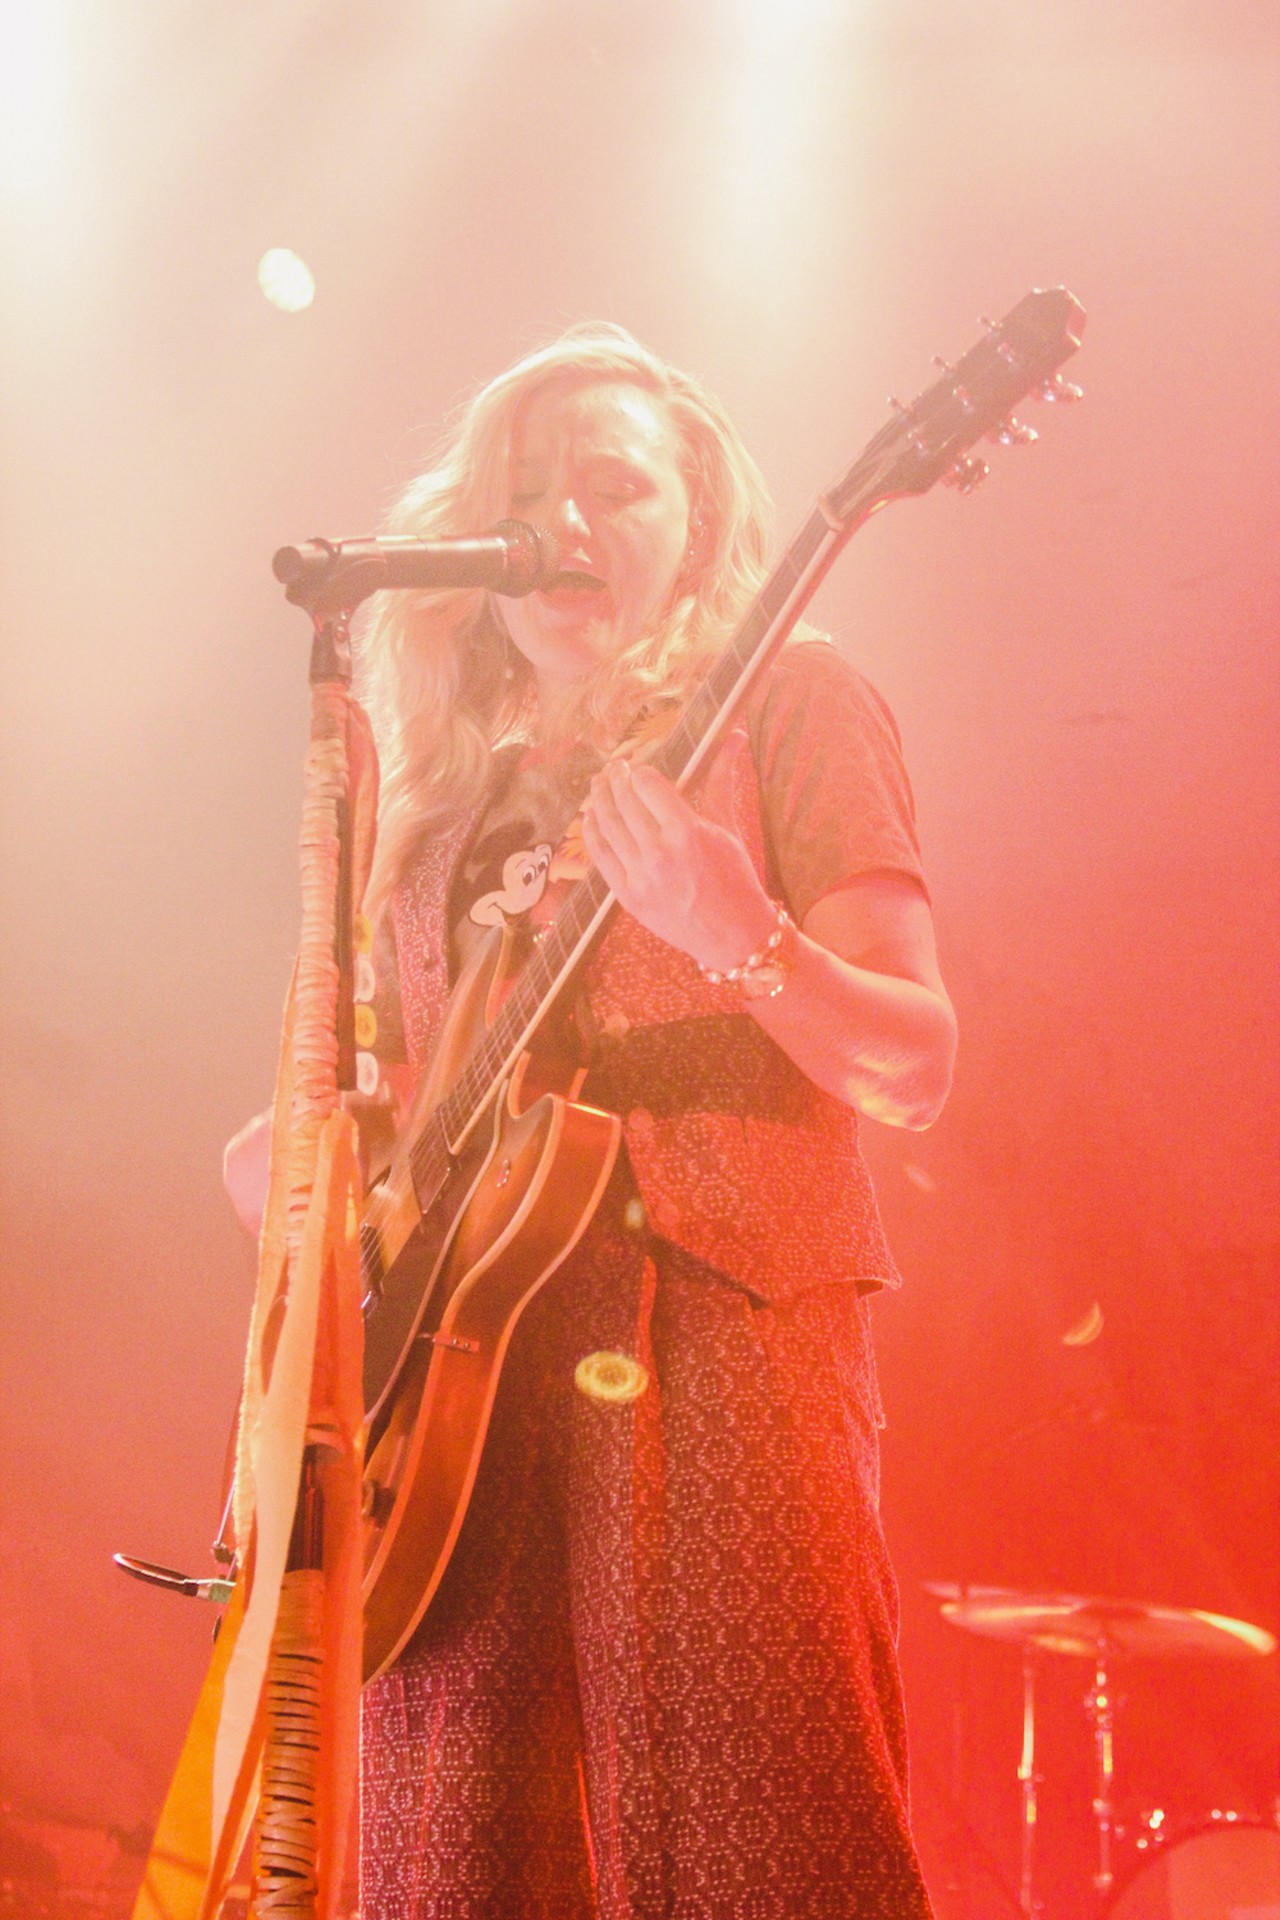 Aly and AJ gets Orlando audience 'Up On Their Feet' during House of Blues tour stop